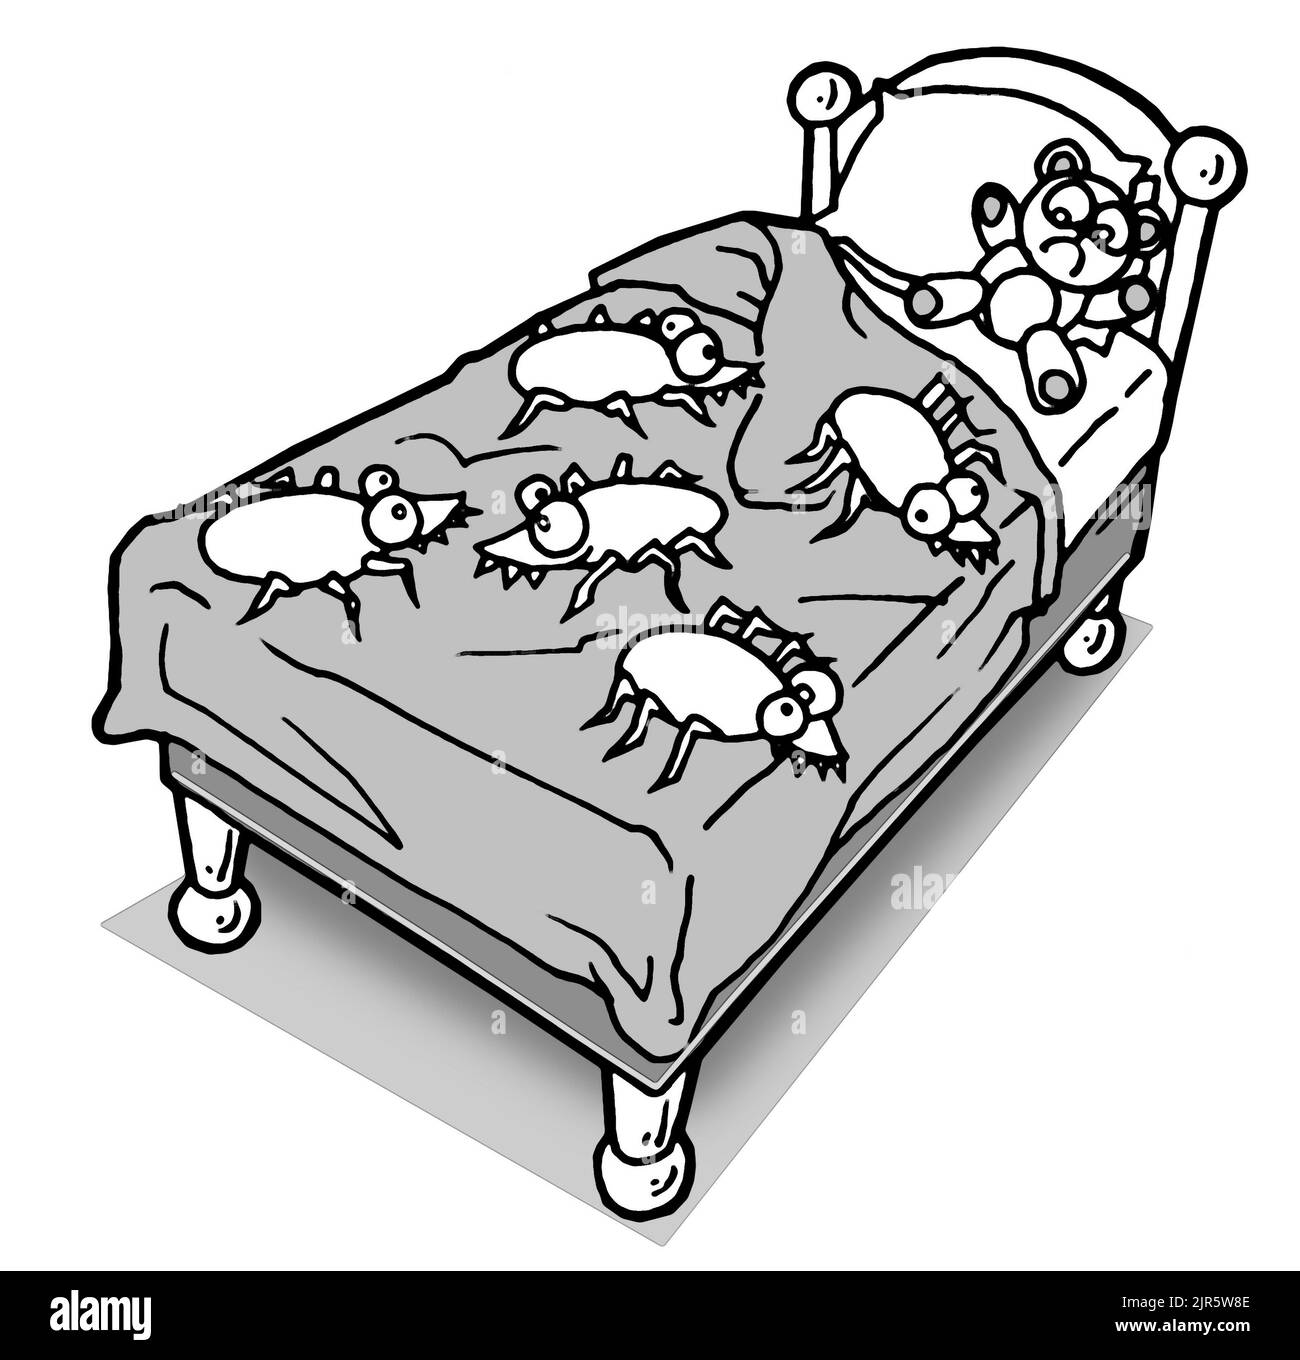 Art cartoon, illustrating a bed covered in oversized bugs. The common bed bugs (cimex lectularius) are insects from the genus Cimex that feed on blood Stock Photo